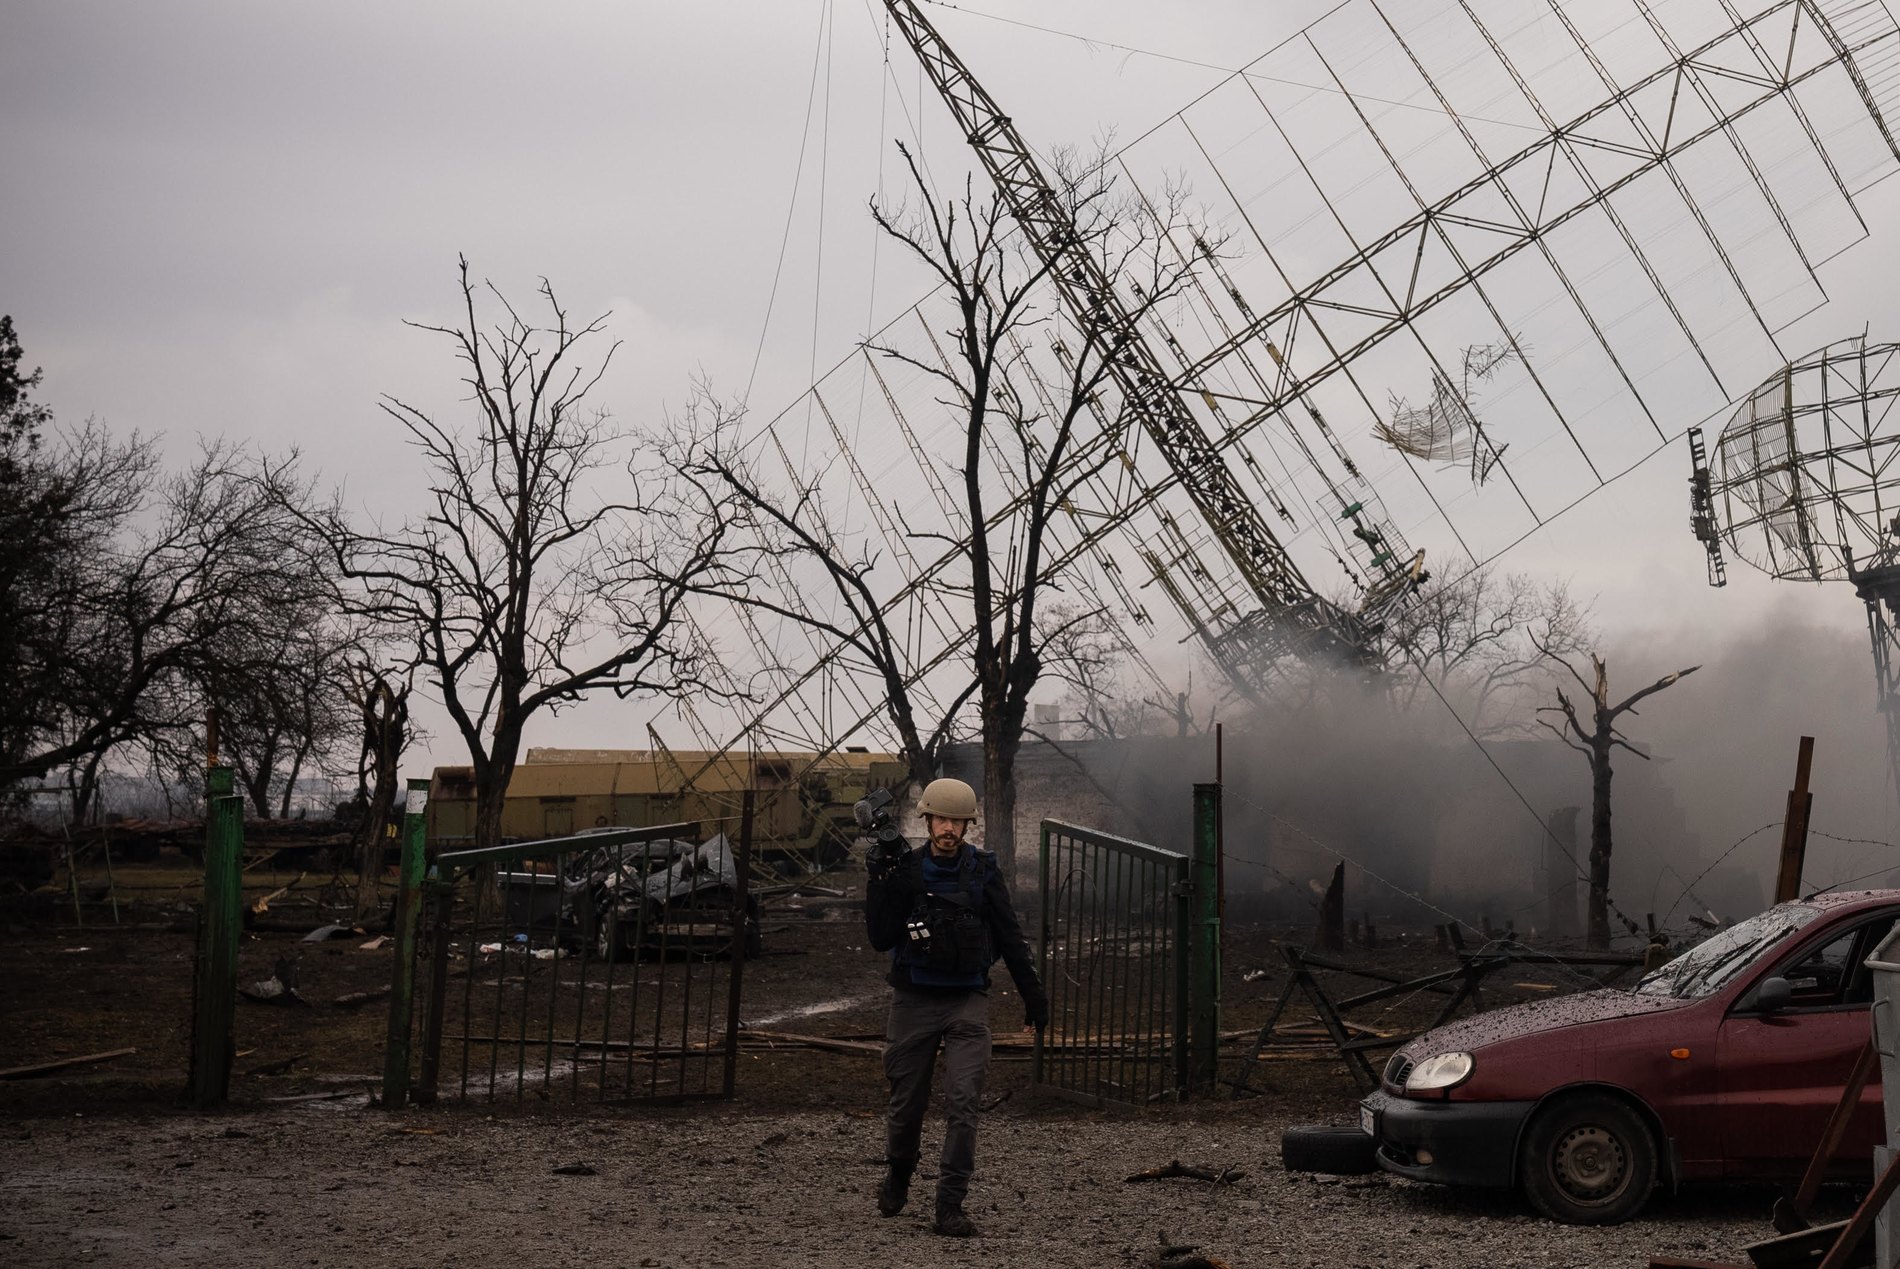 "20 Days in Mariupol" by Mstislav Chernov has been submitted as Ukraine's entry for the Oscars